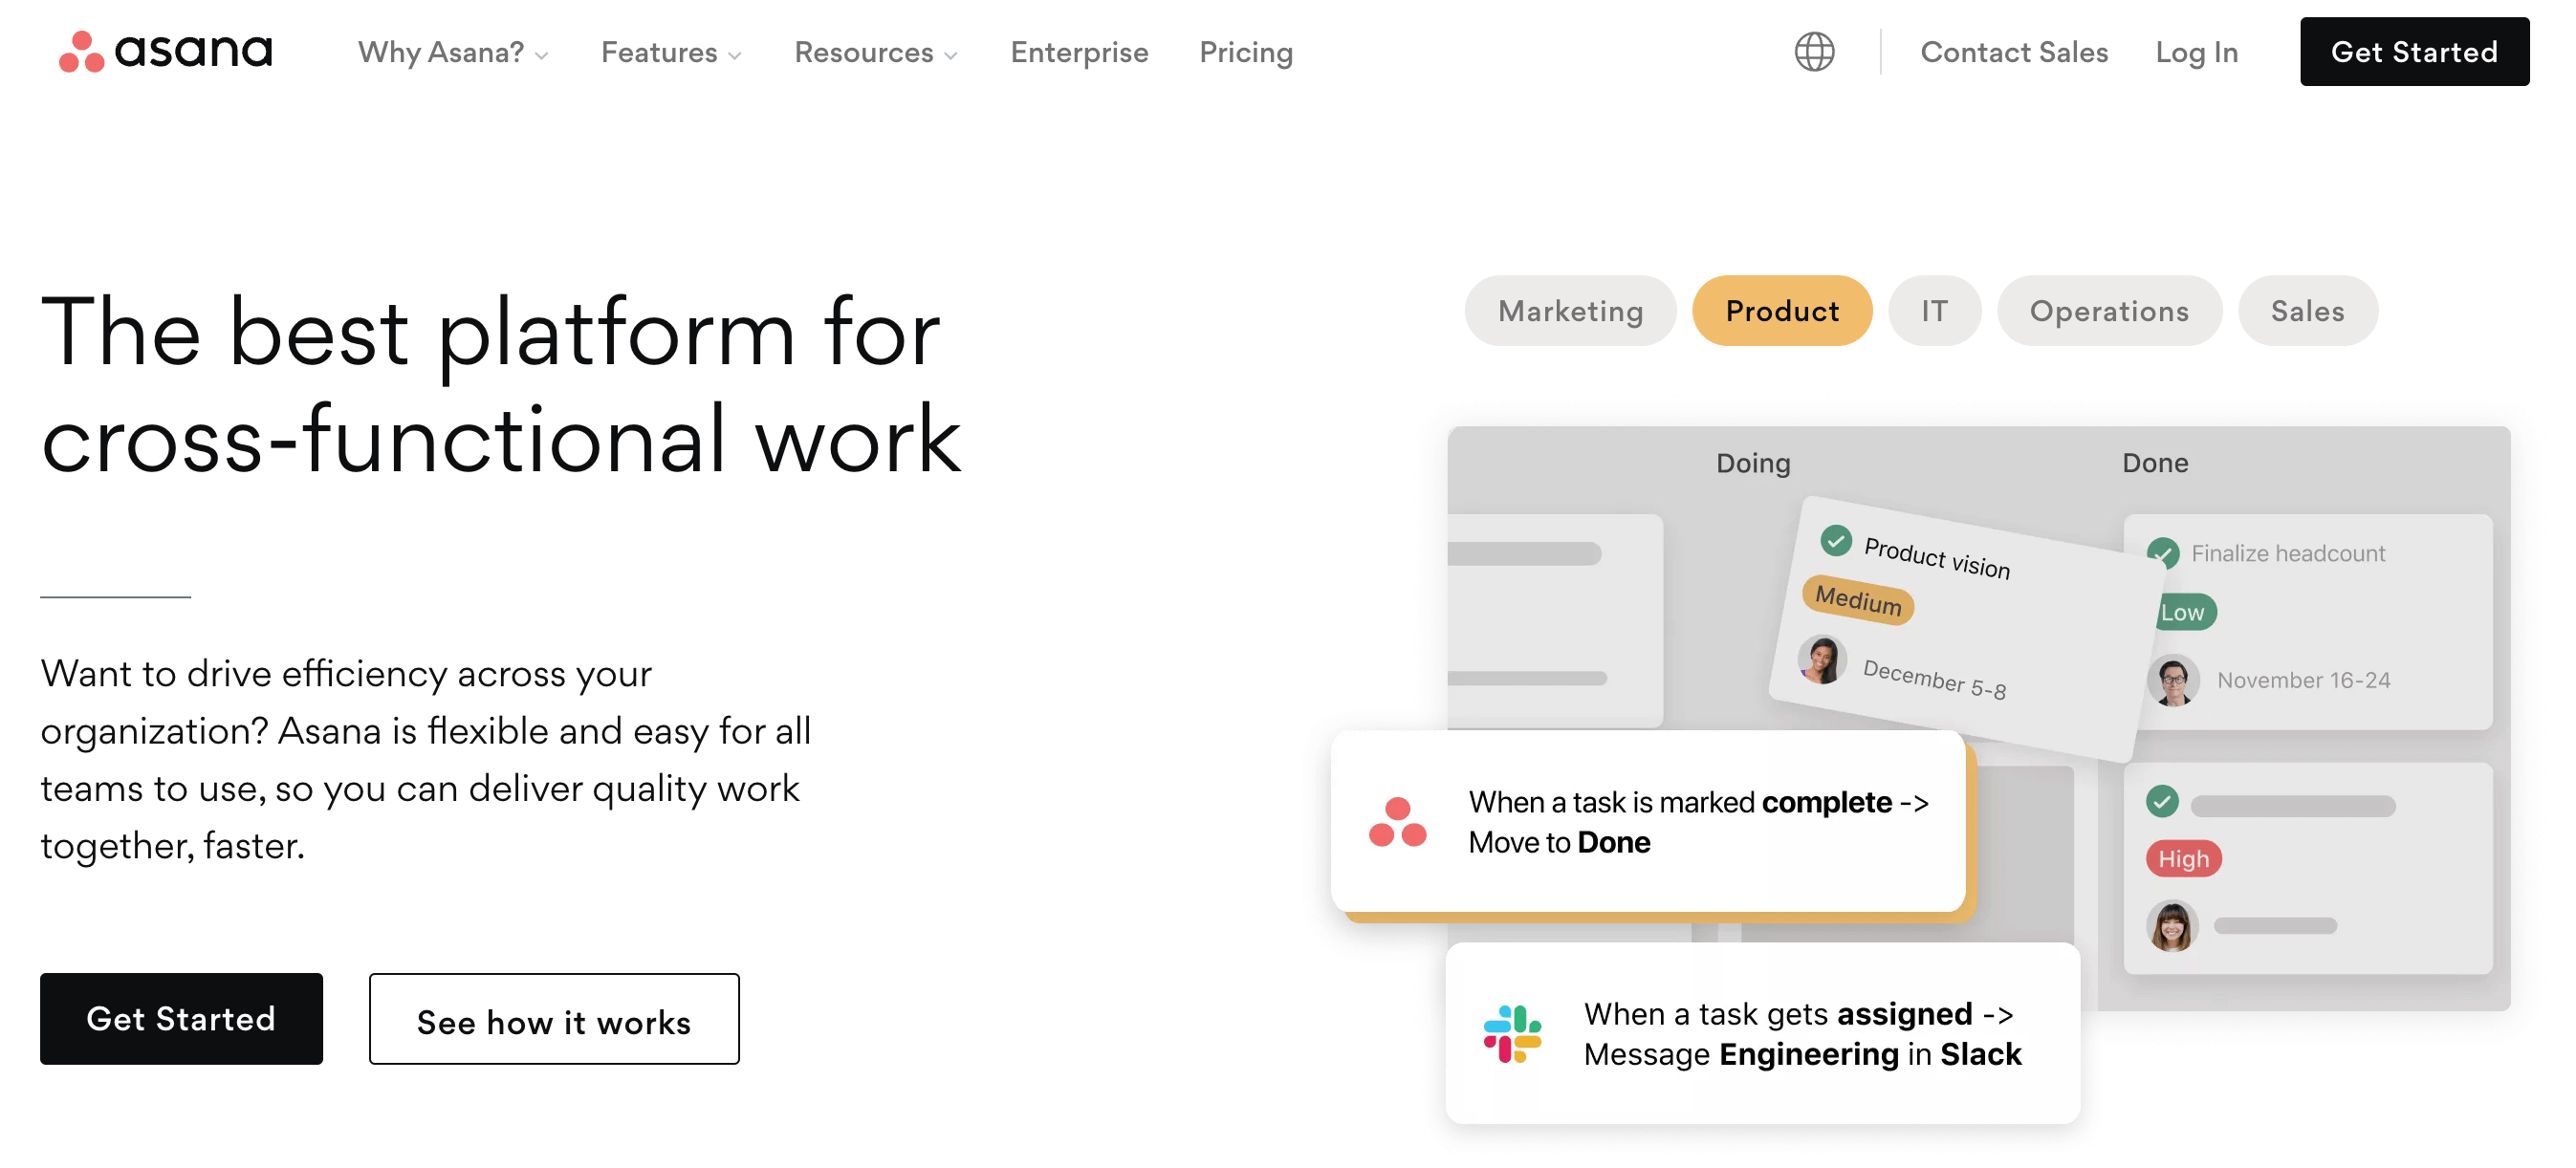 Asana's homepage with a headline "The project management tool as the best platform dor cross-functional work."